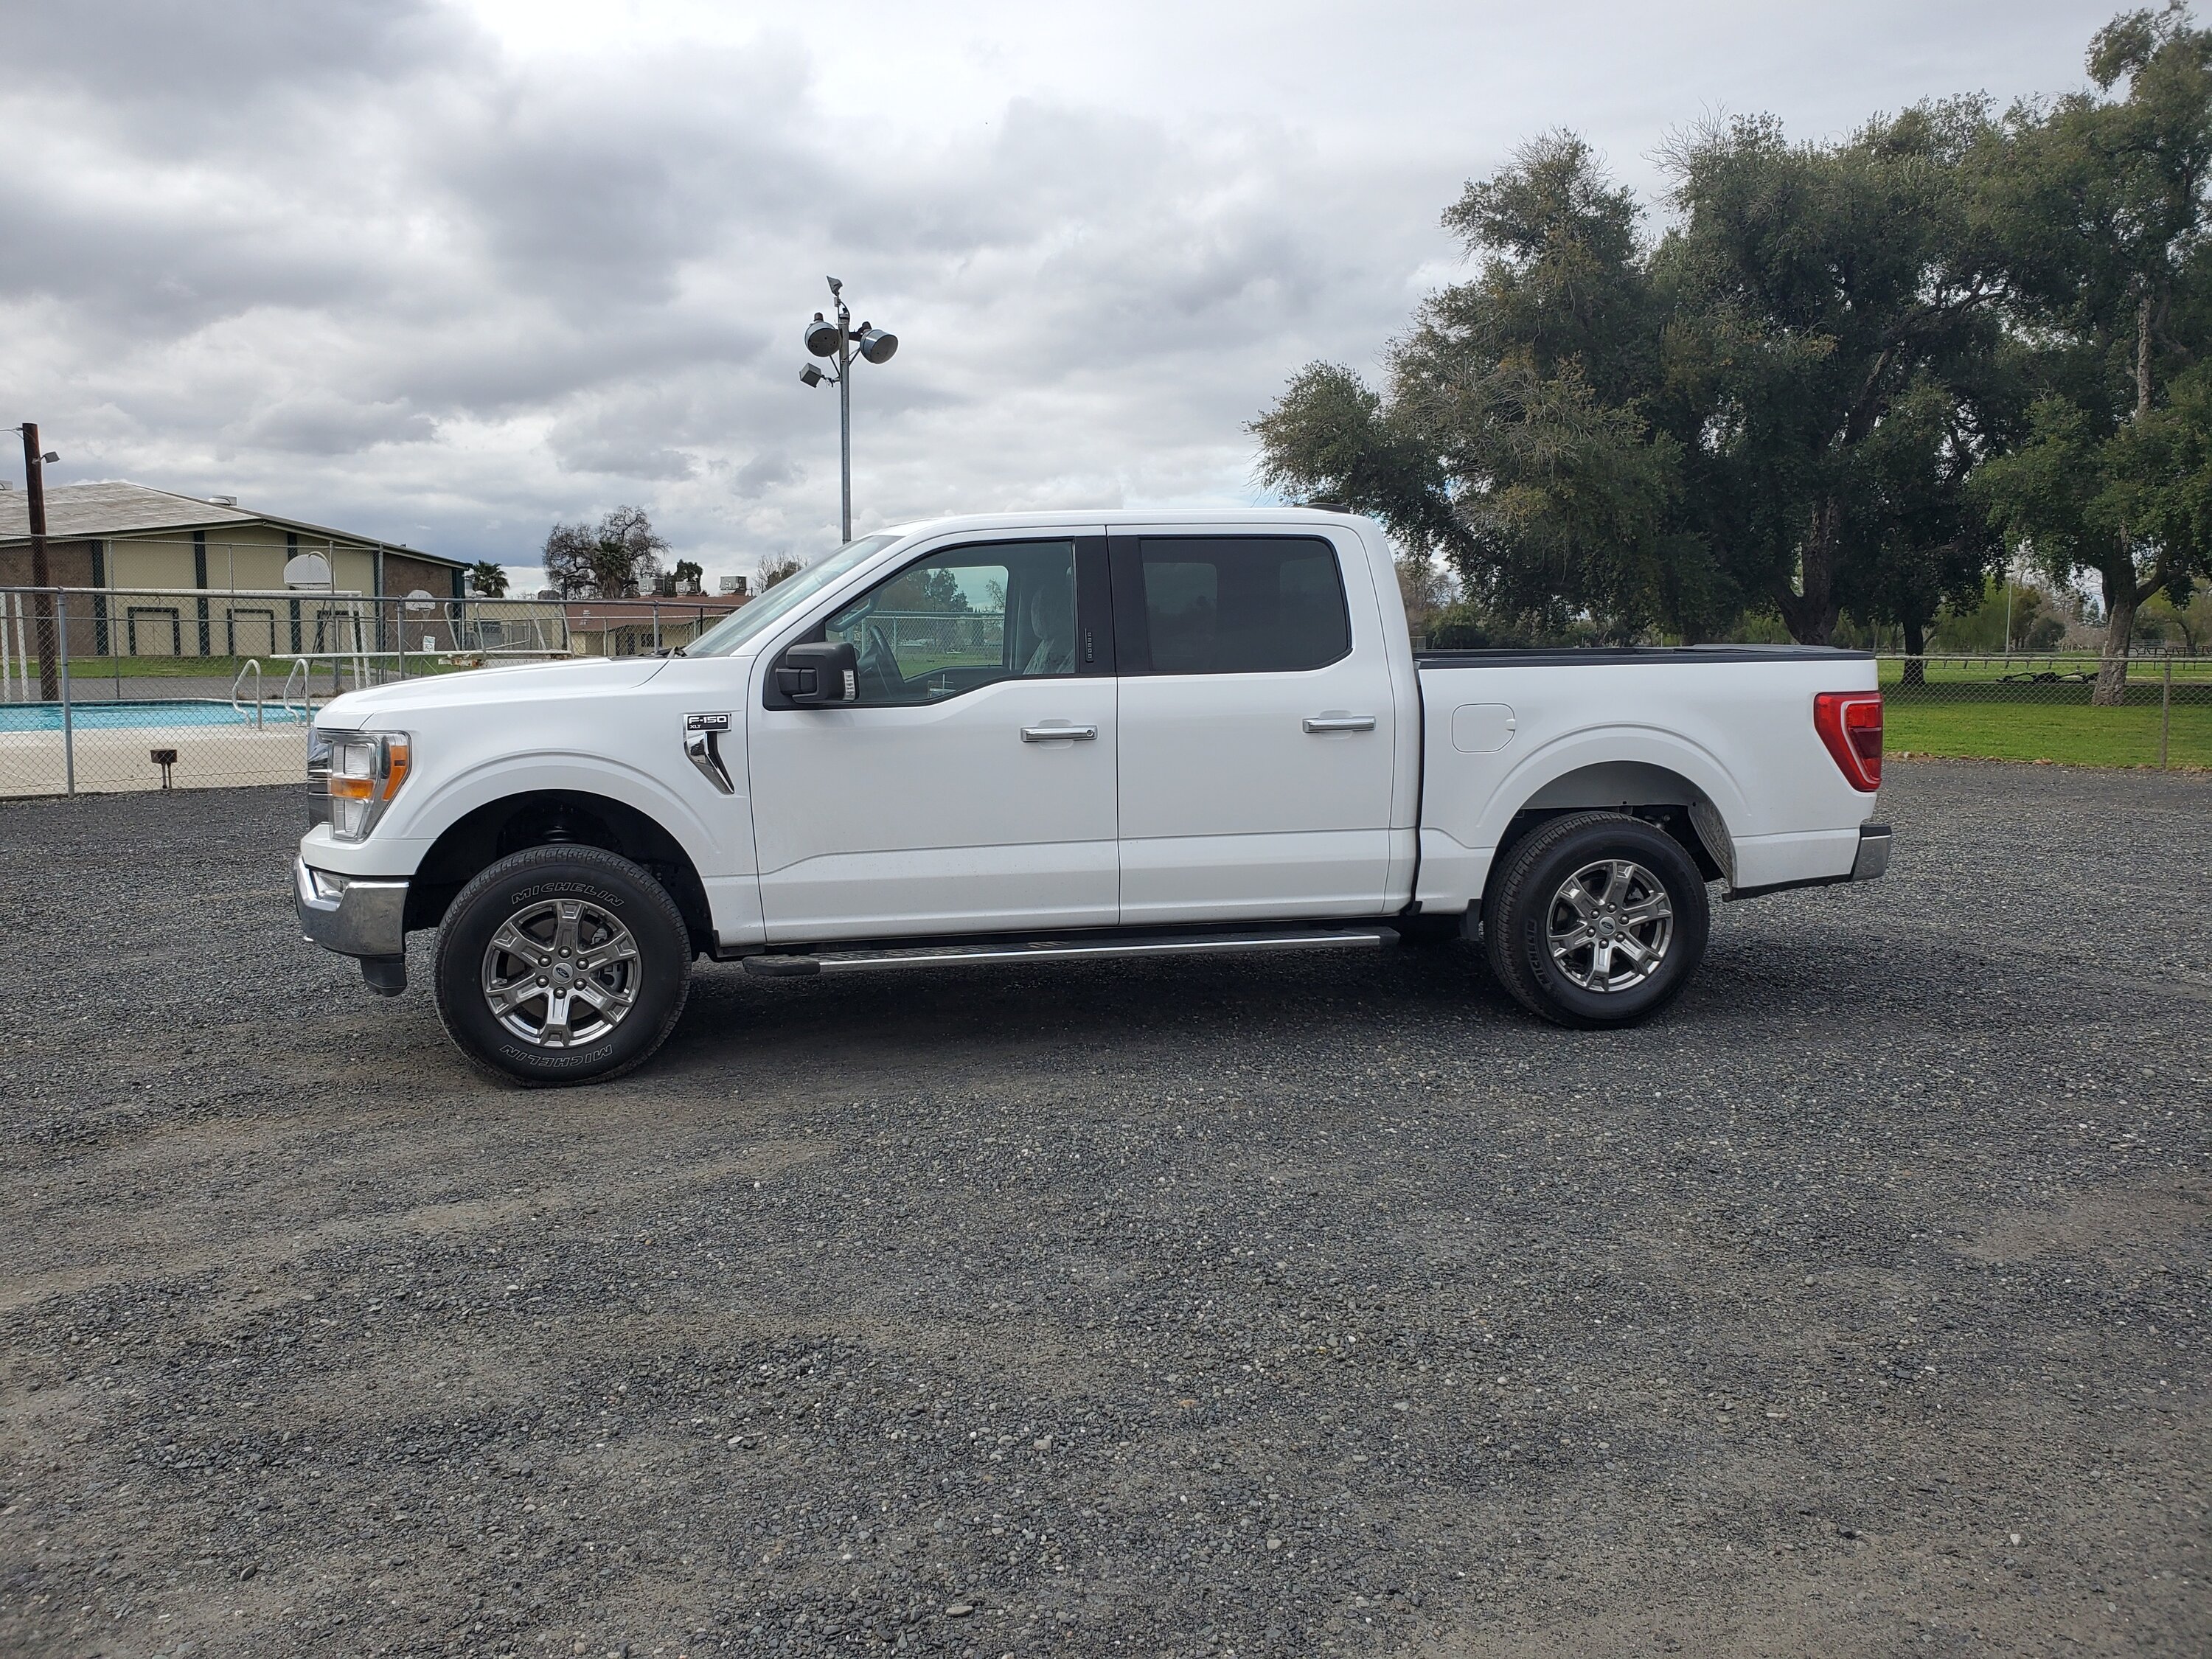 Ford F-150 Fox 2.0 Coilovers installed -- review and photos 20240309_135805_Original